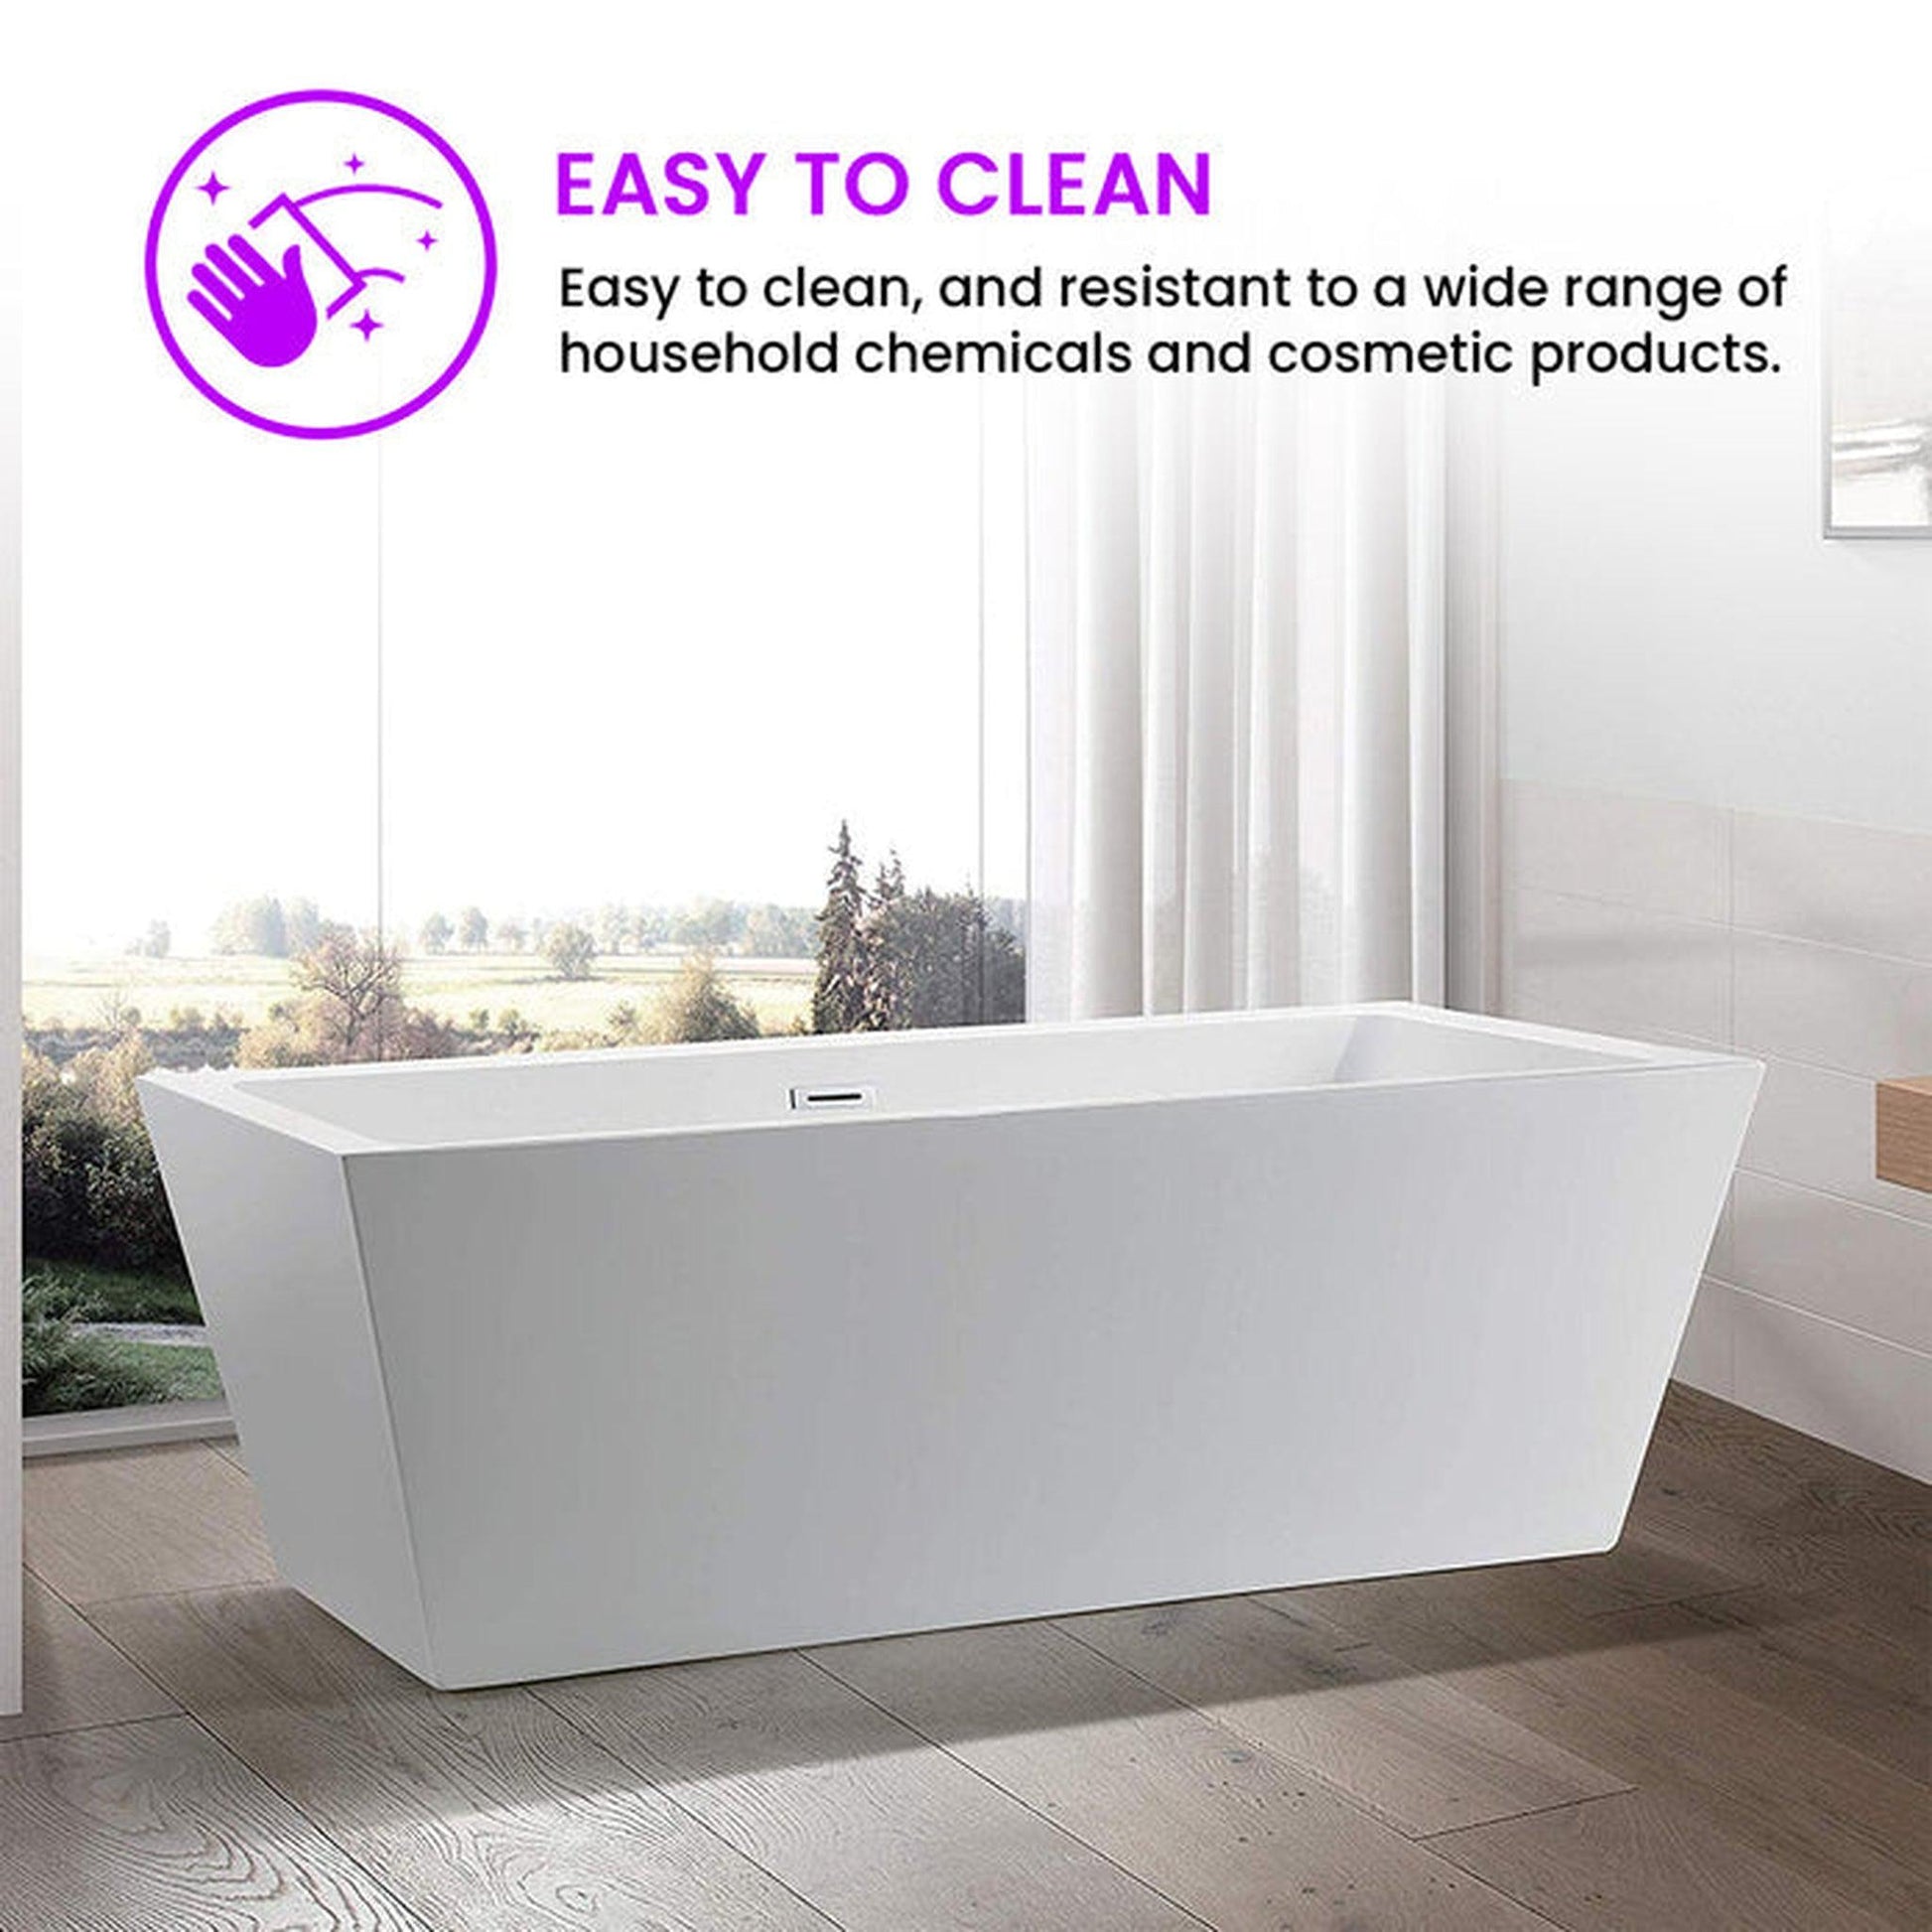 Vanity Art 59" x 30" White Acrylic Rectangle Freestanding Bathtub With Polished Chrome Pop-up Drain, Slotted Overflow and Flexible Drain Hose